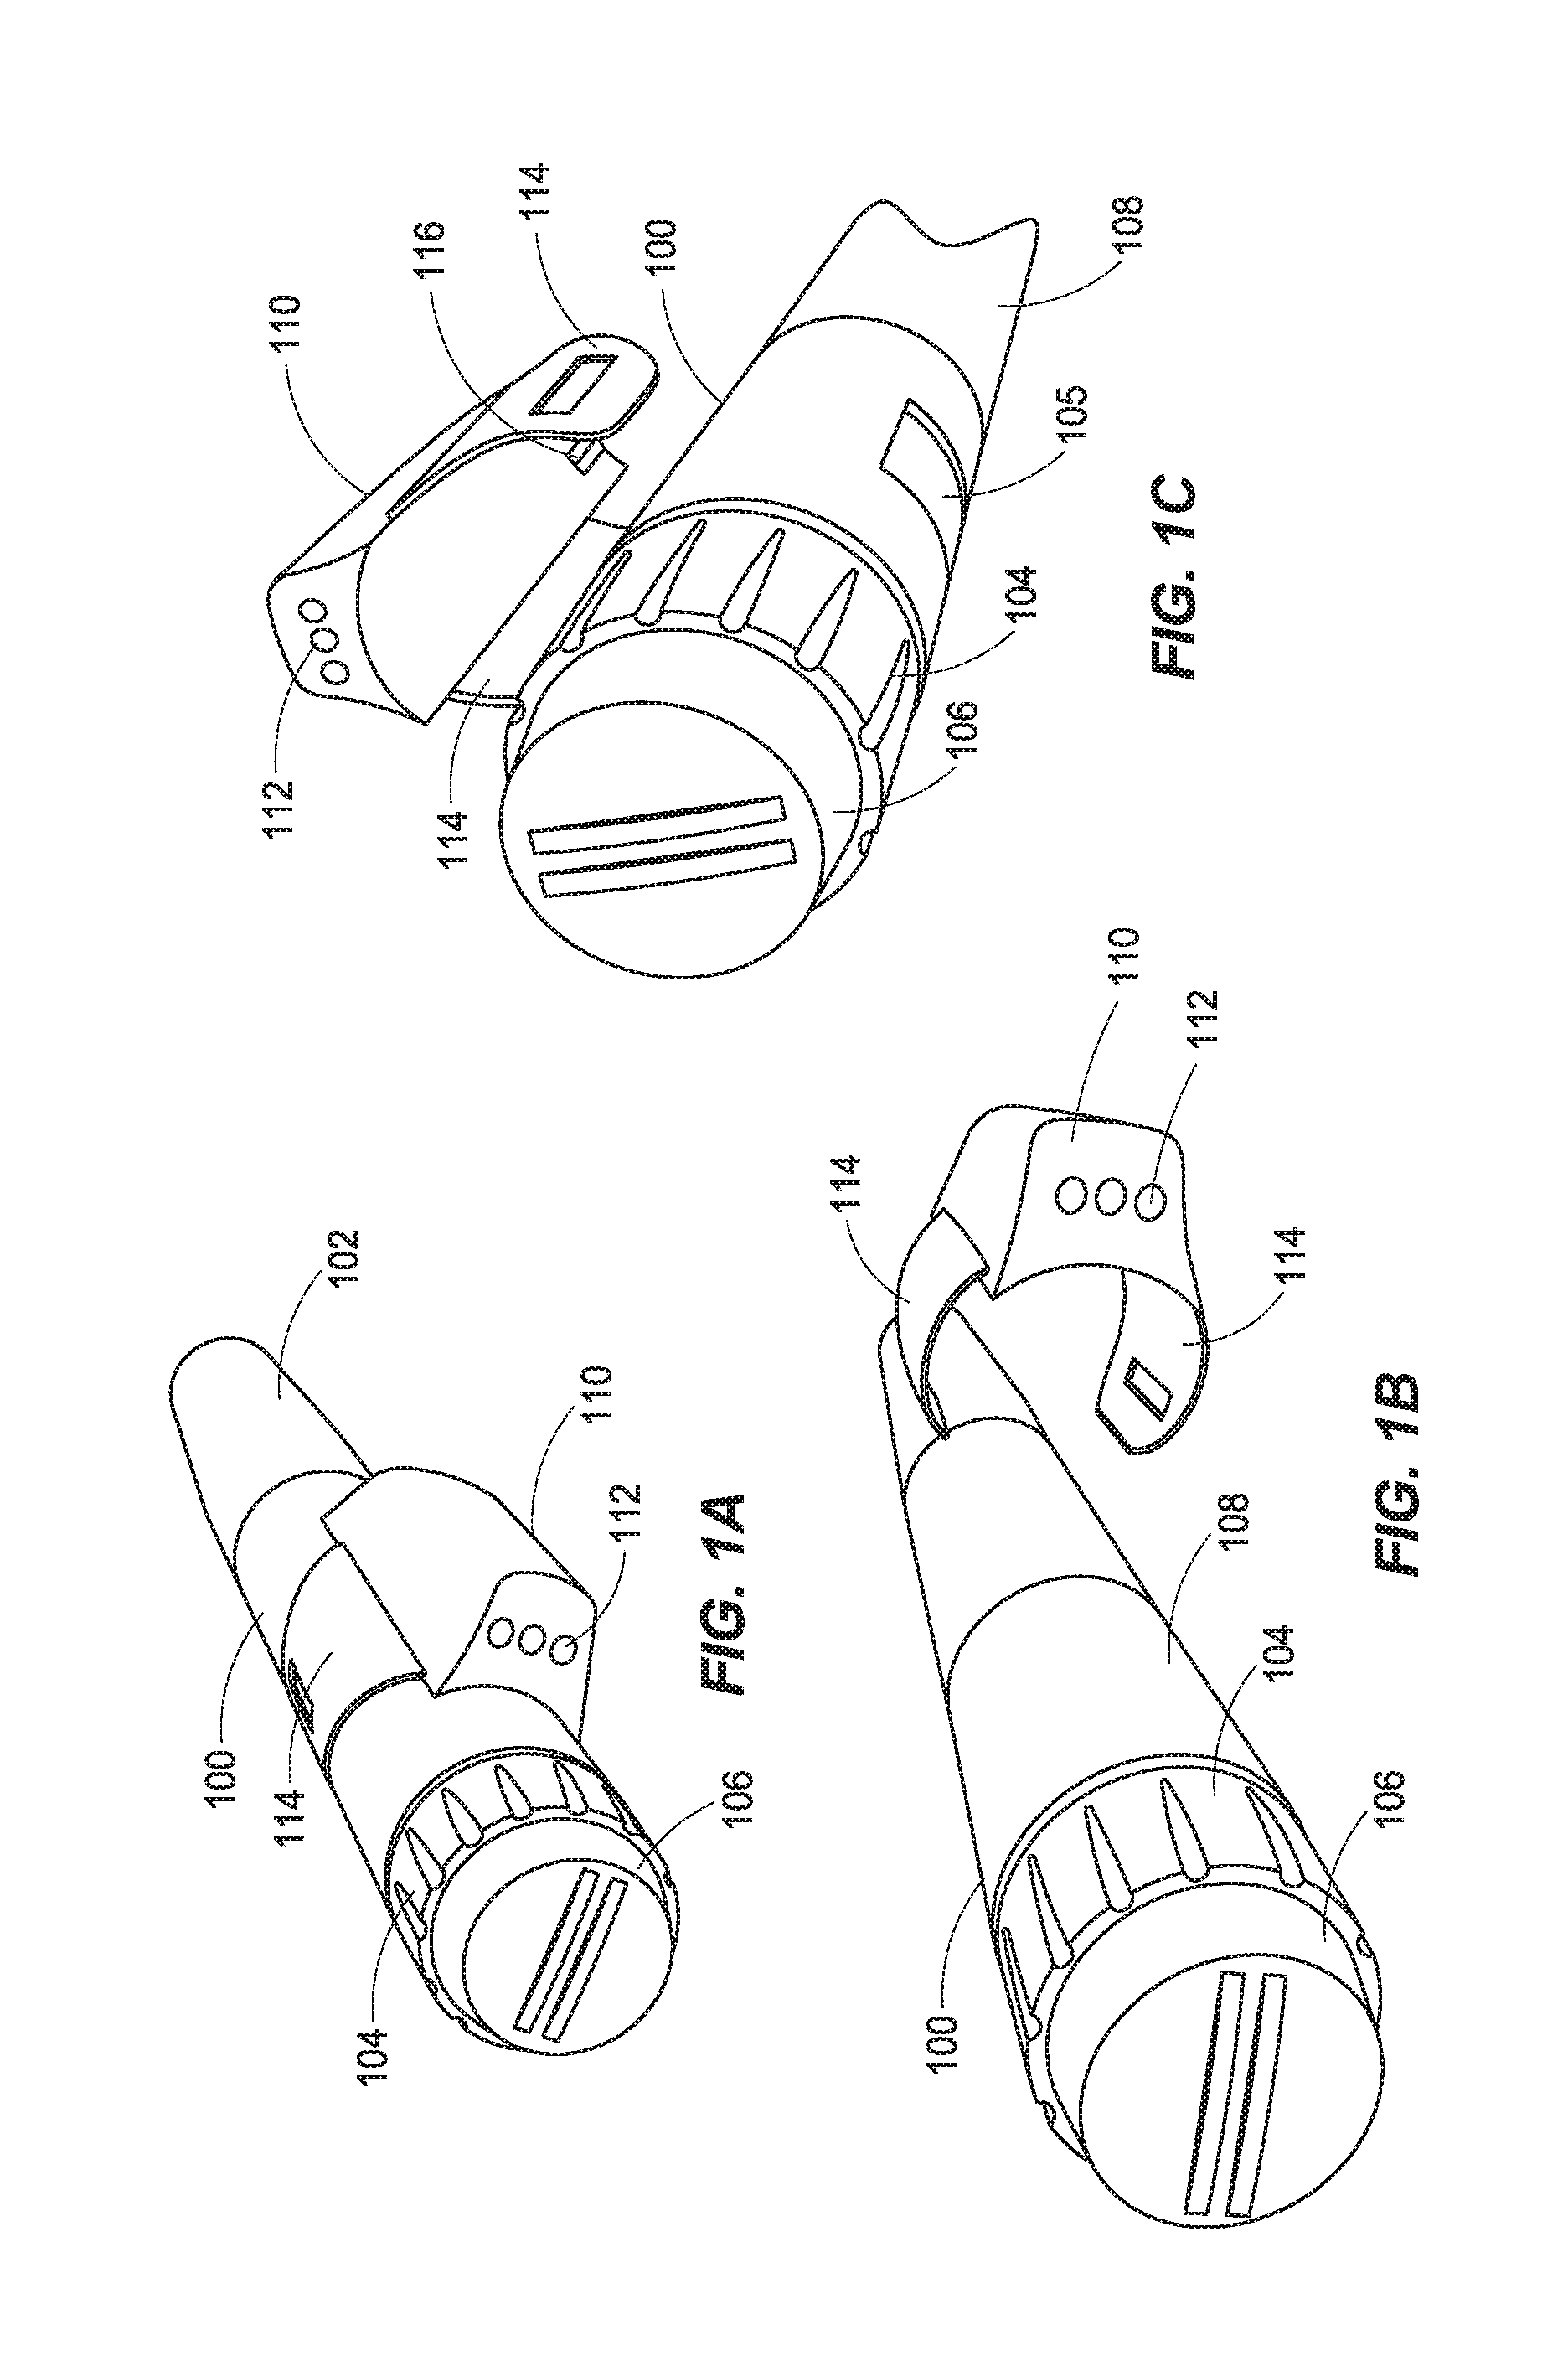 Method and device for capturing a dose dialing event